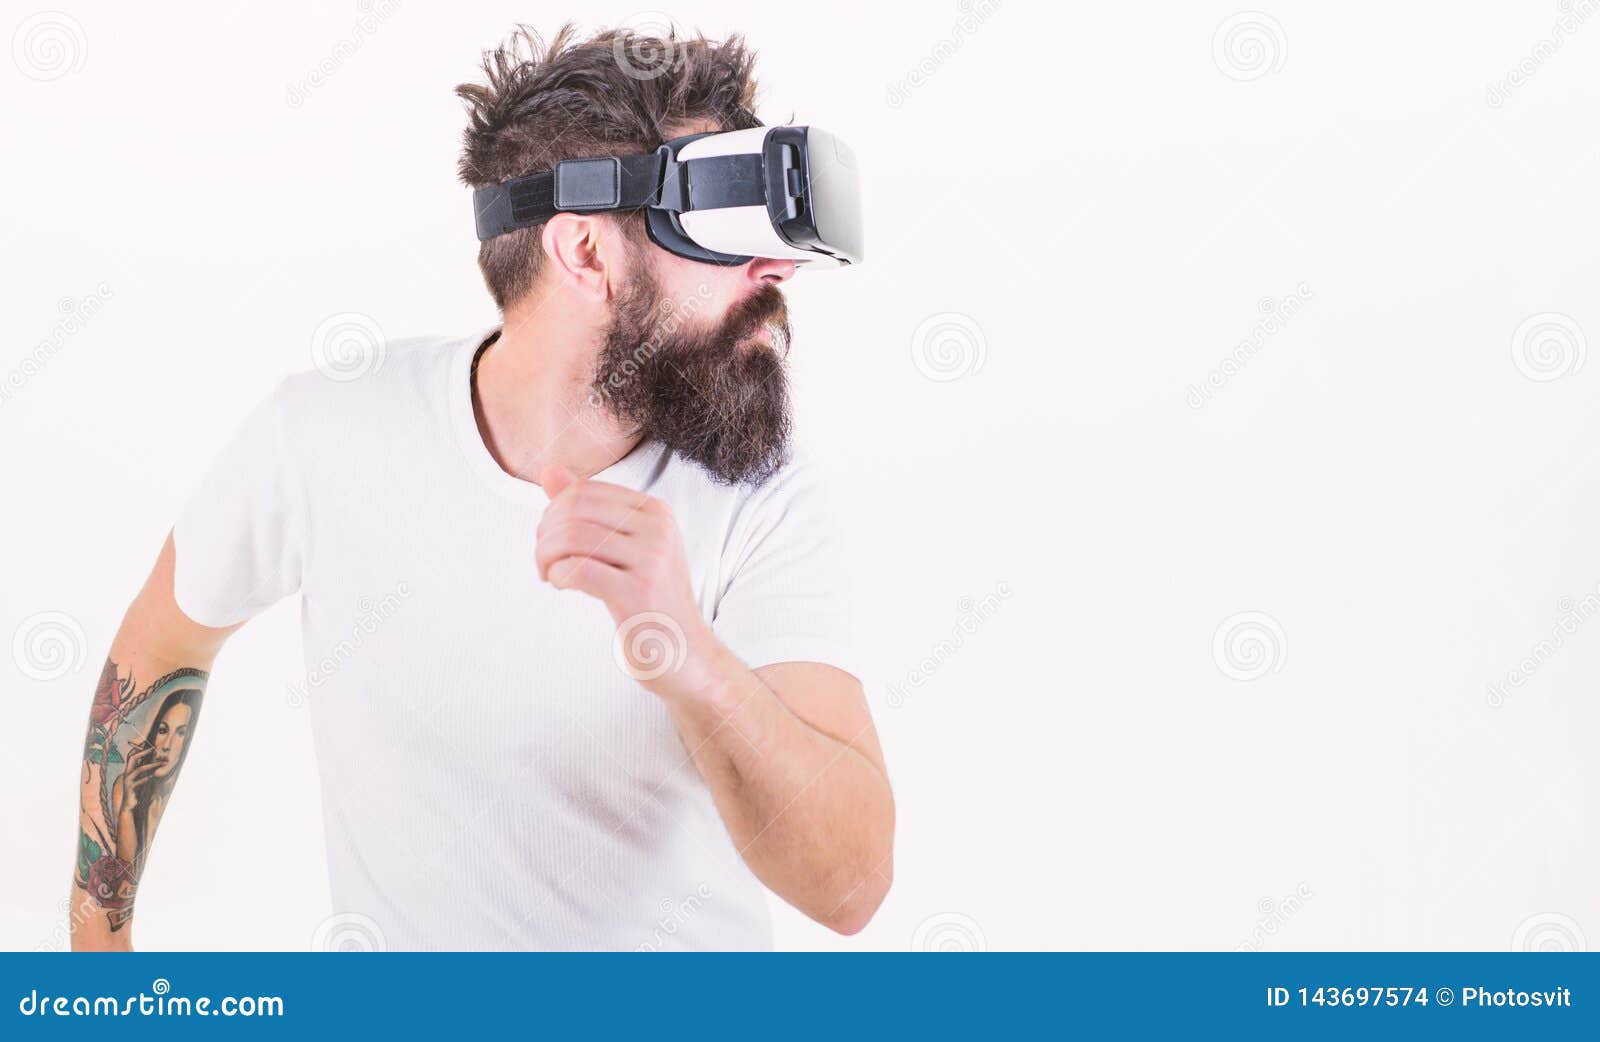 installing interact play vr